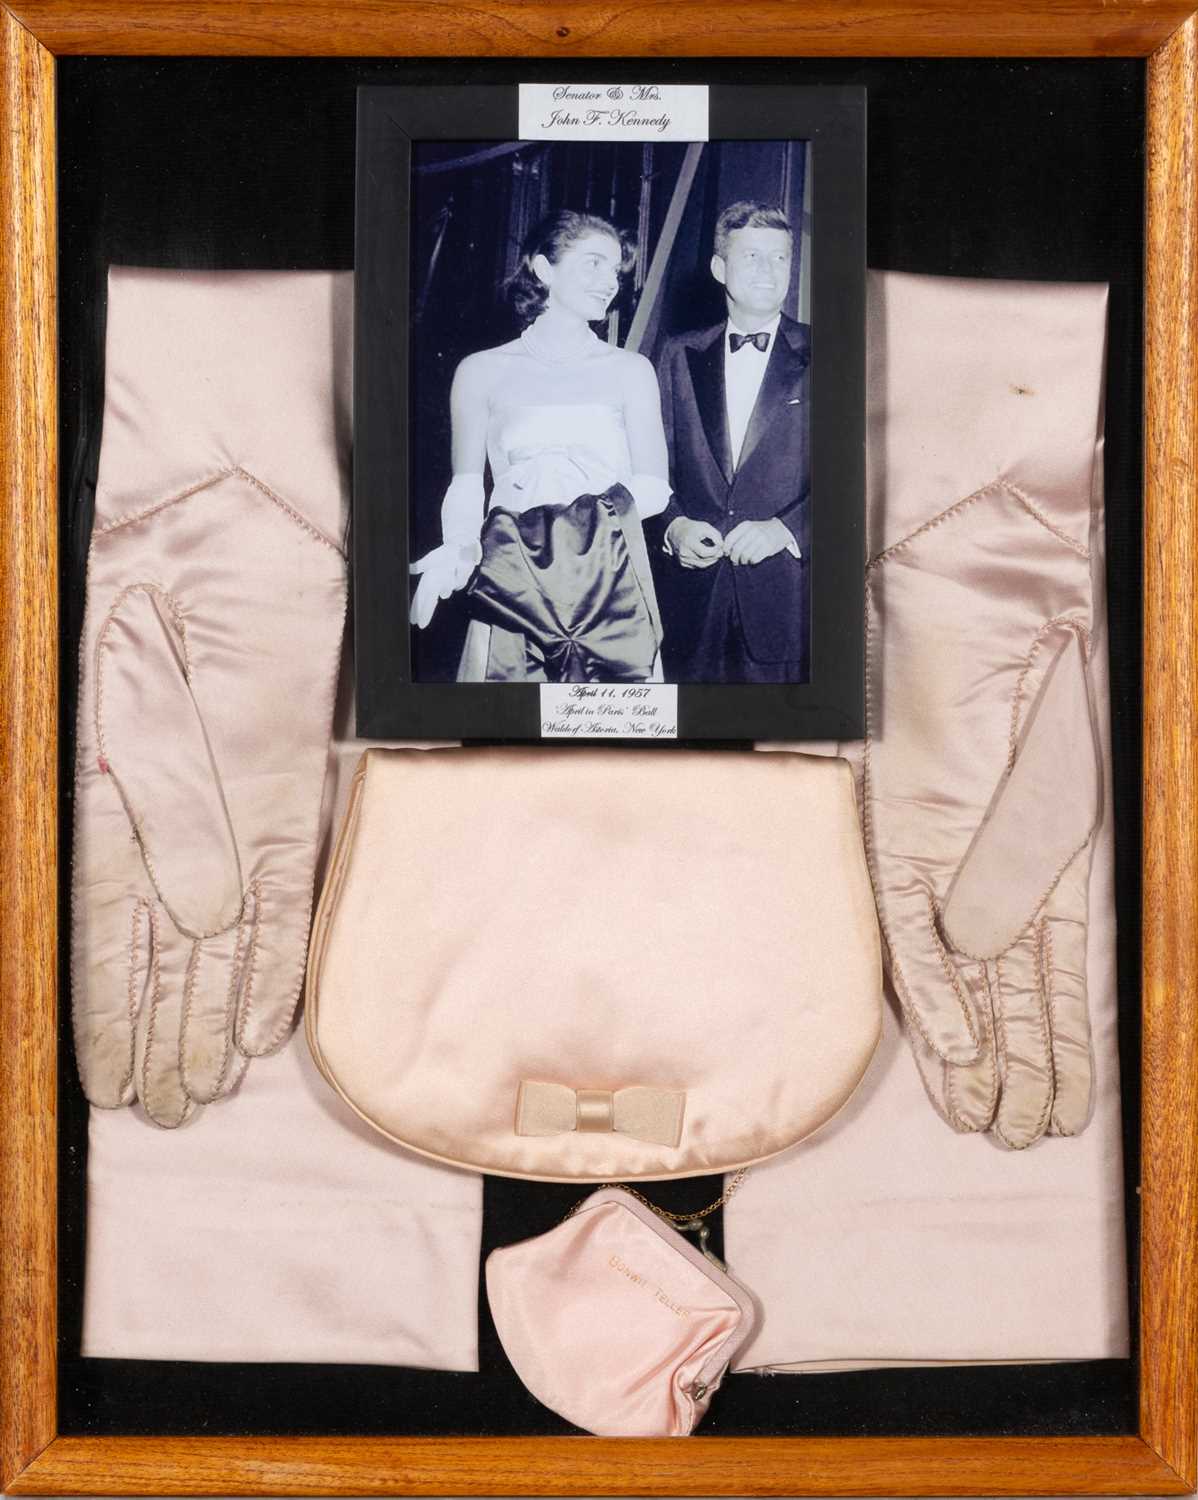 Lot 5020 - Formal gloves, evening clutch and a change purse worn by Jacqueline Kennedy